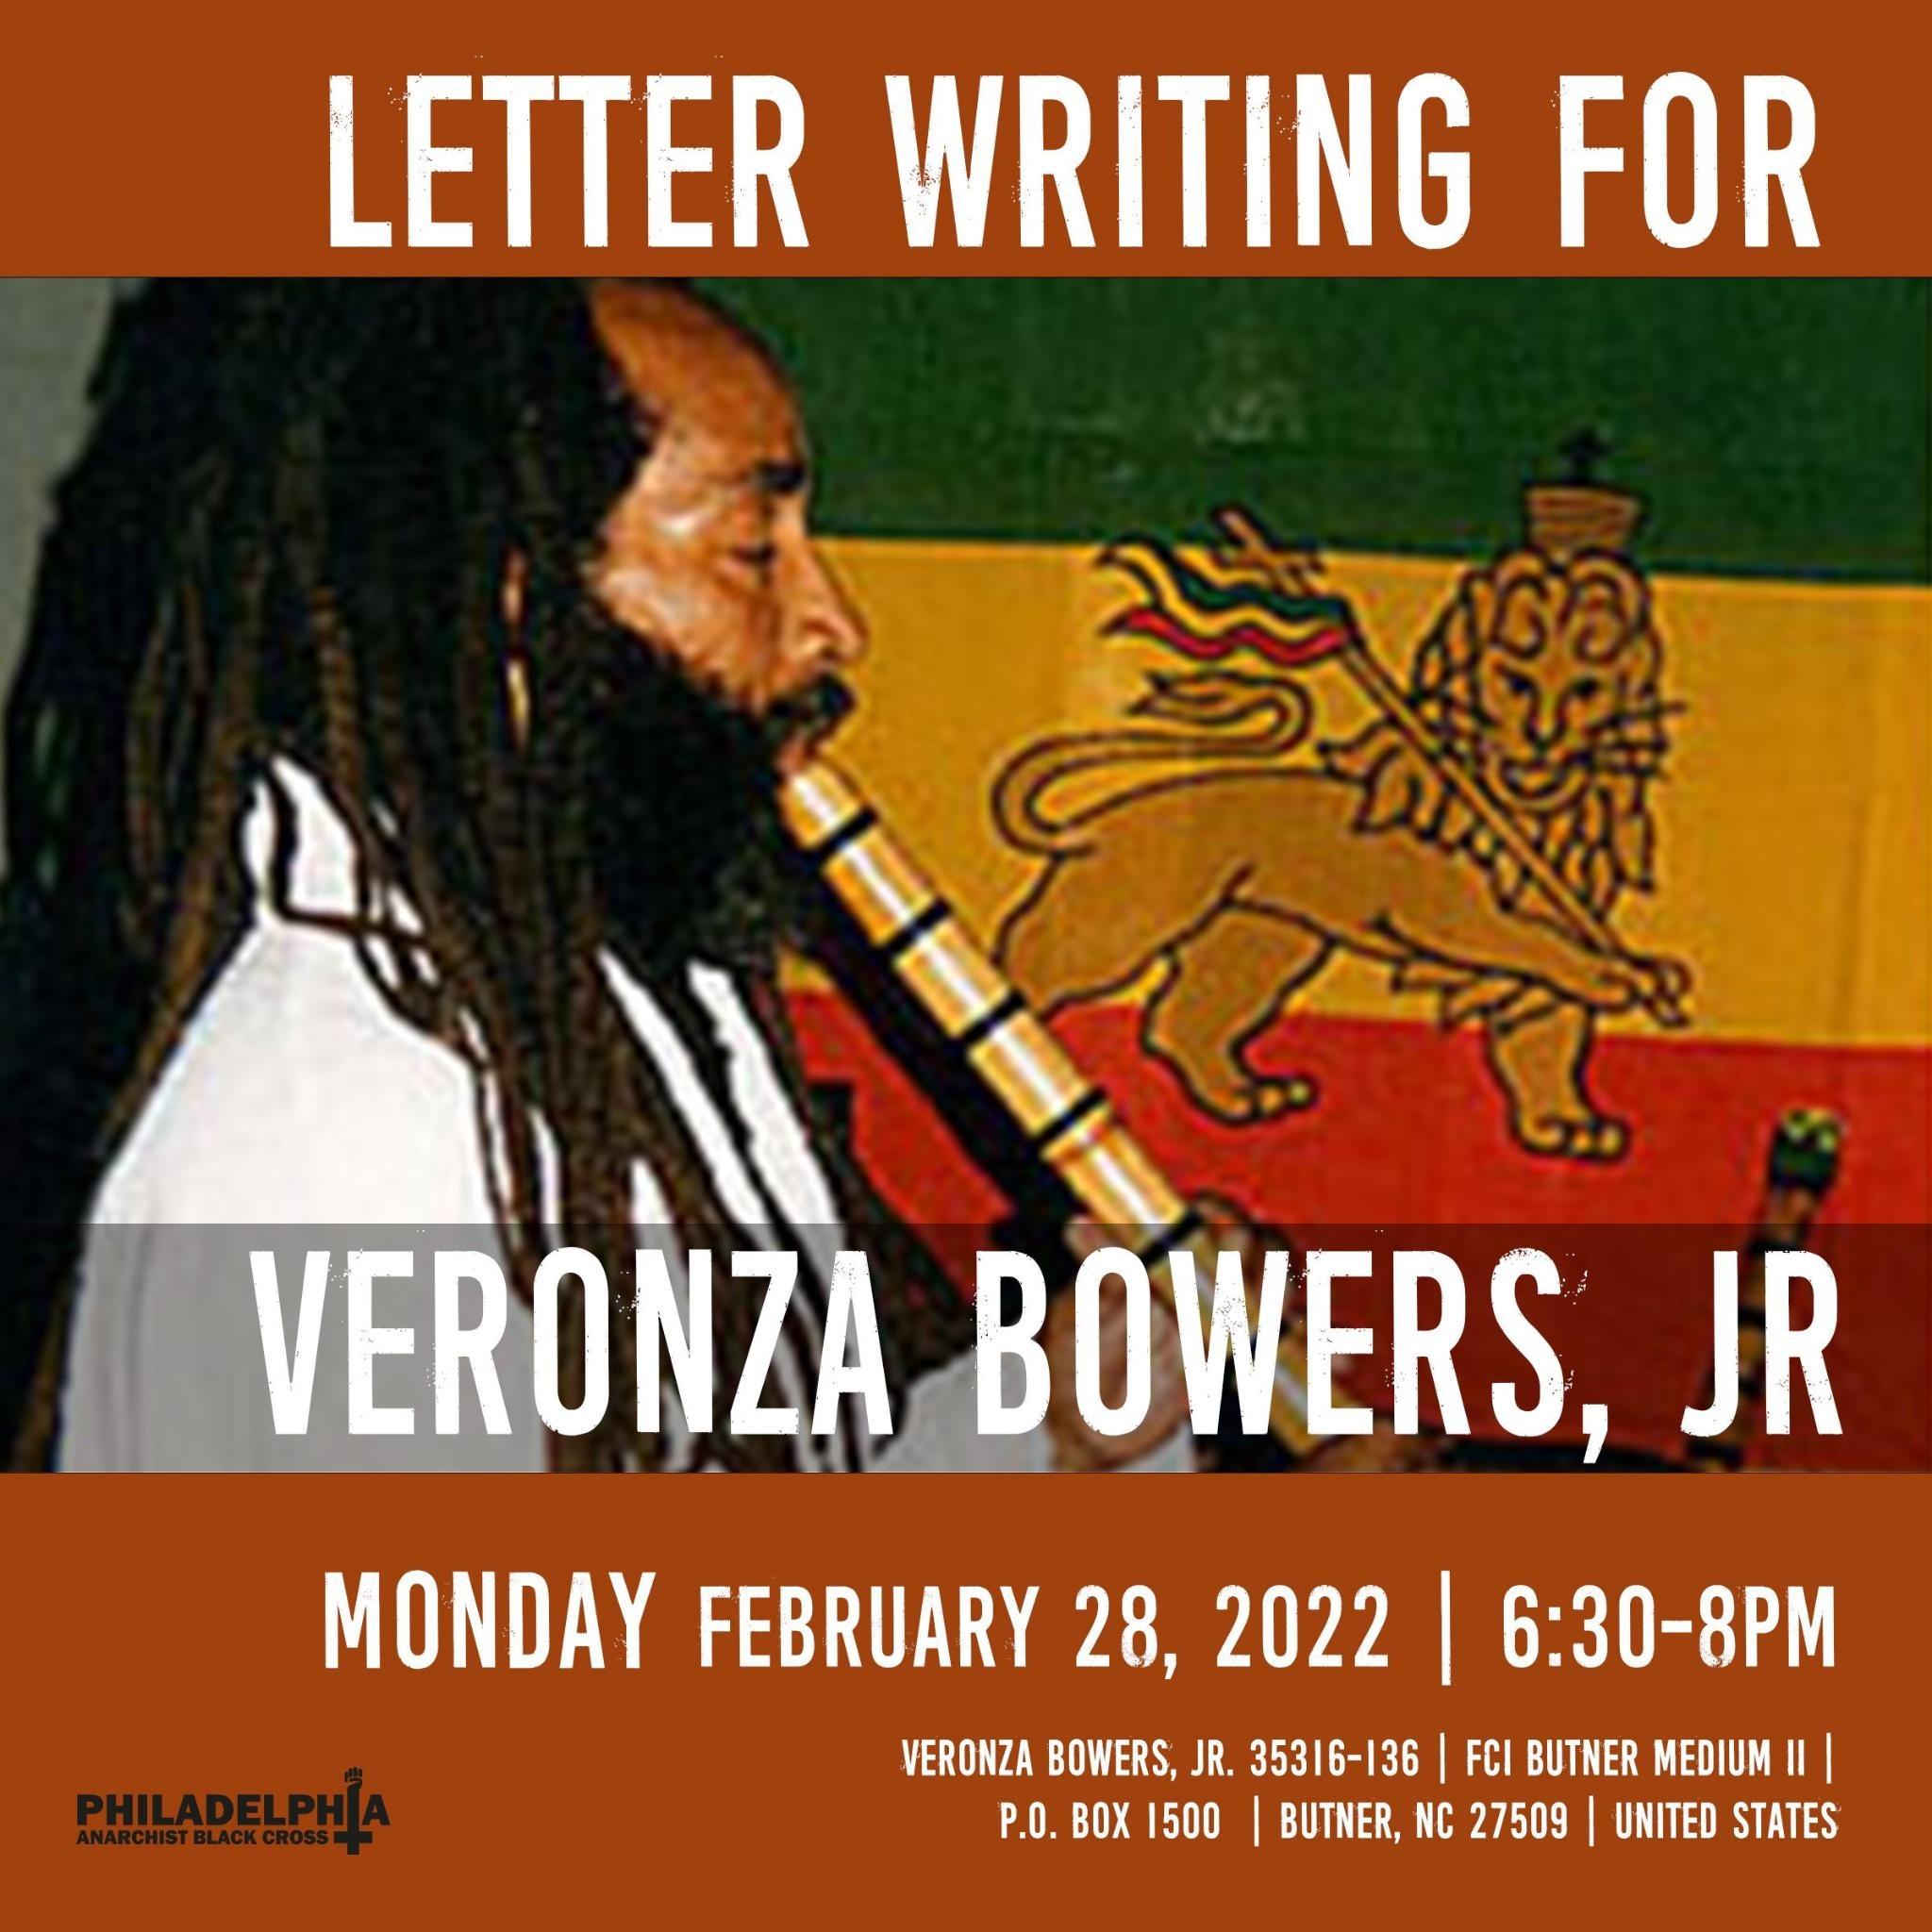 Monday February 28th: Letter-writing for Veronza Bowers